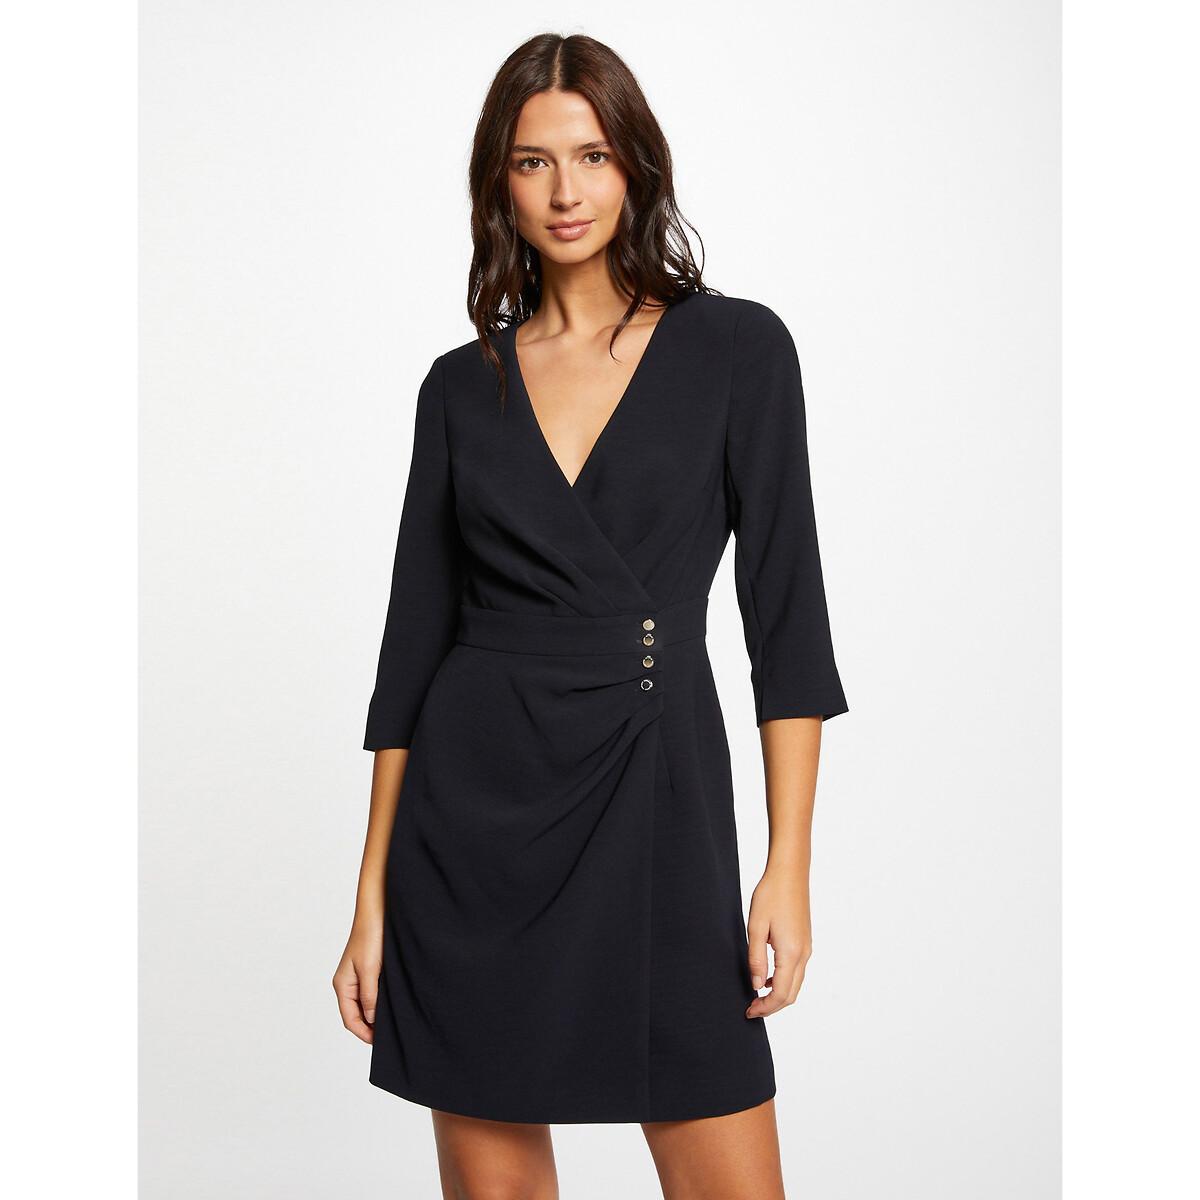 Draped Wrapover Dress with 3/4 Length Sleeves